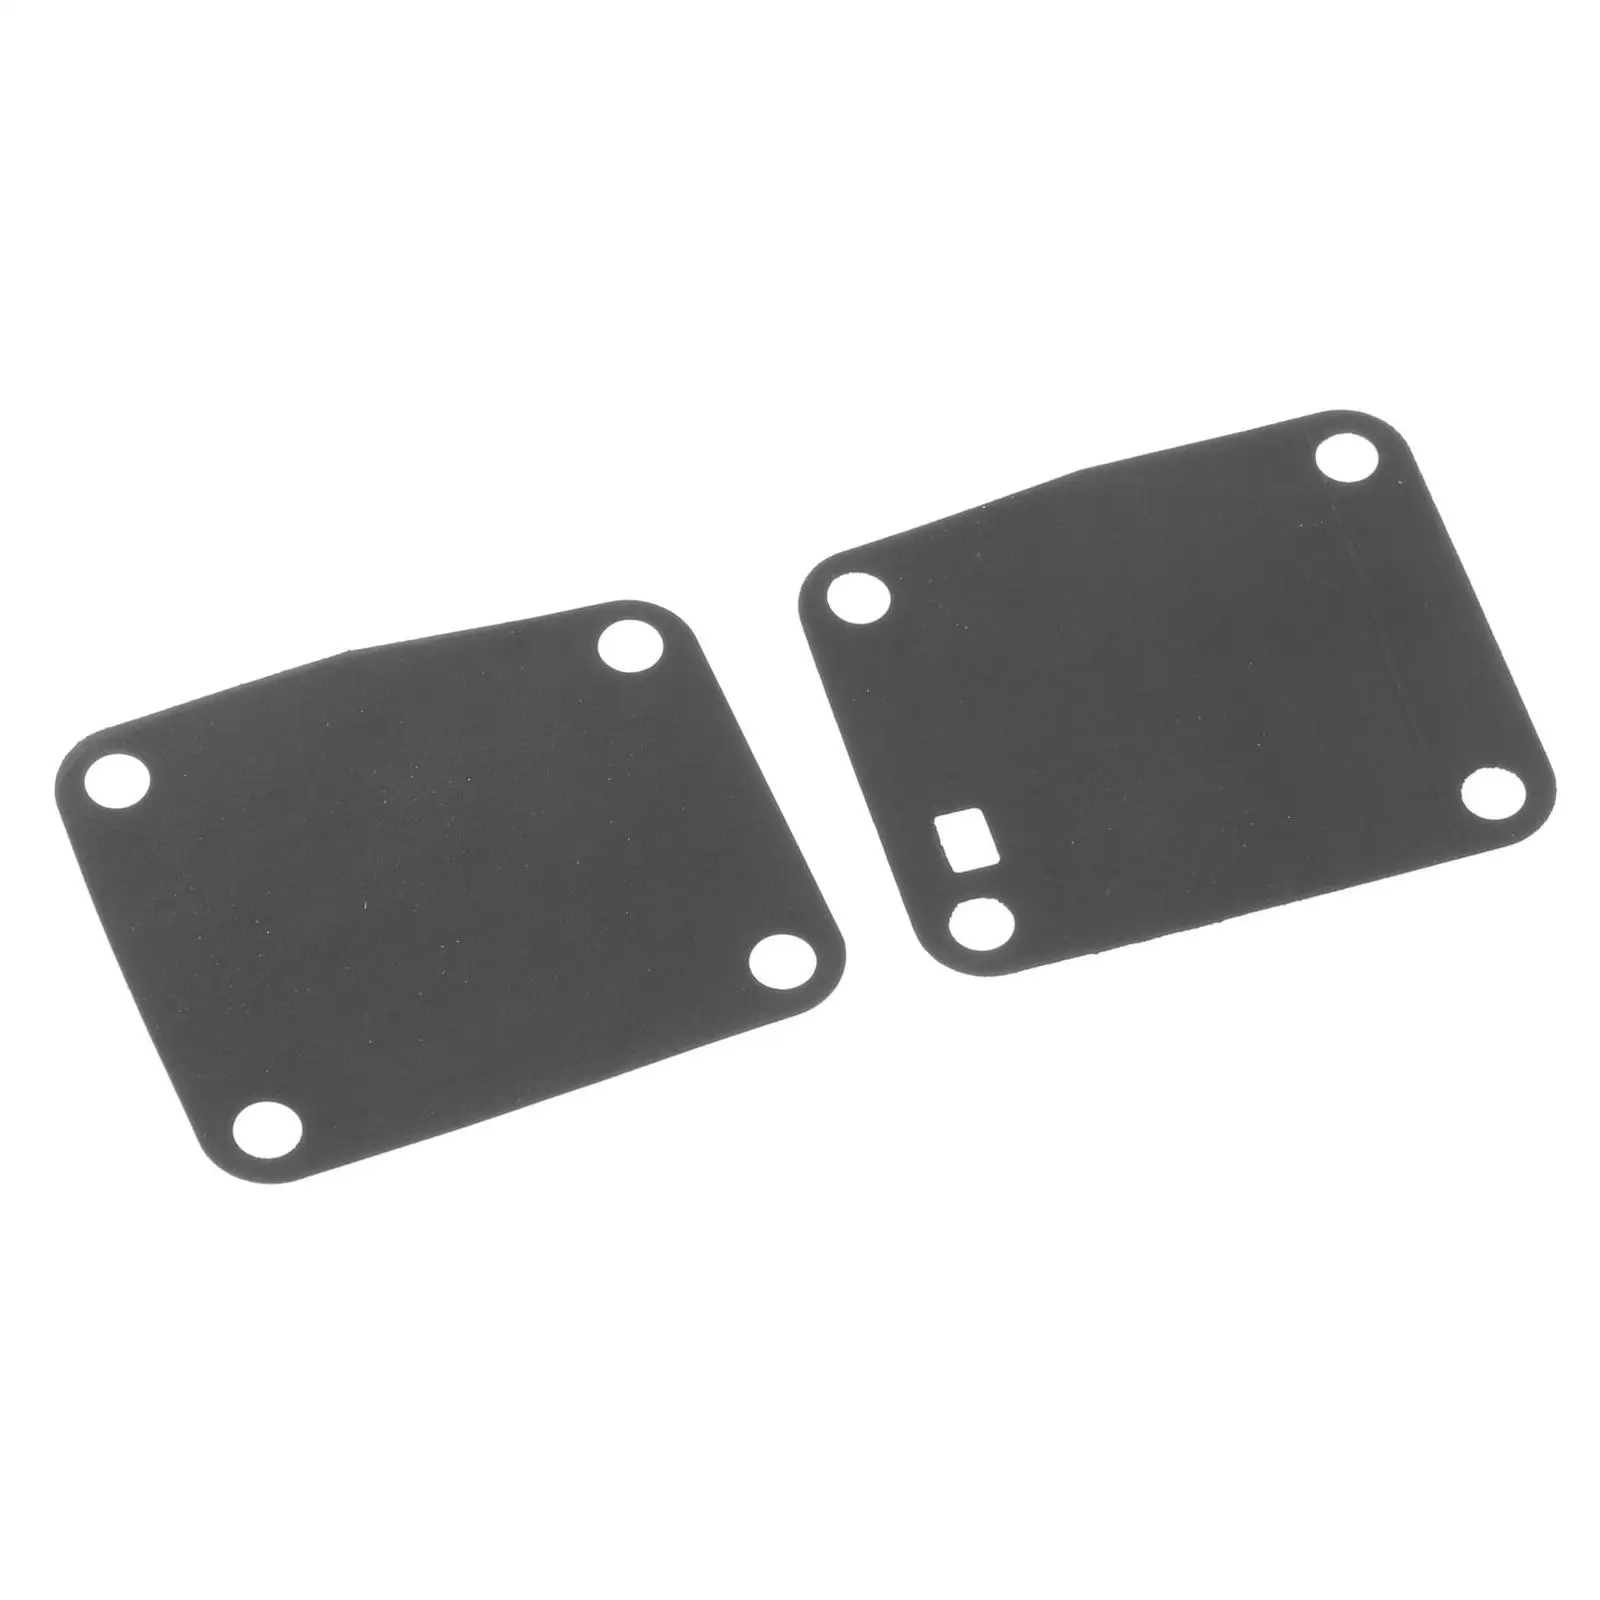 Boat Fuel Diaphragm Set 63V-24411 6411, for 9.15-Stroke, Direct Replaces, Easy to Install Durable